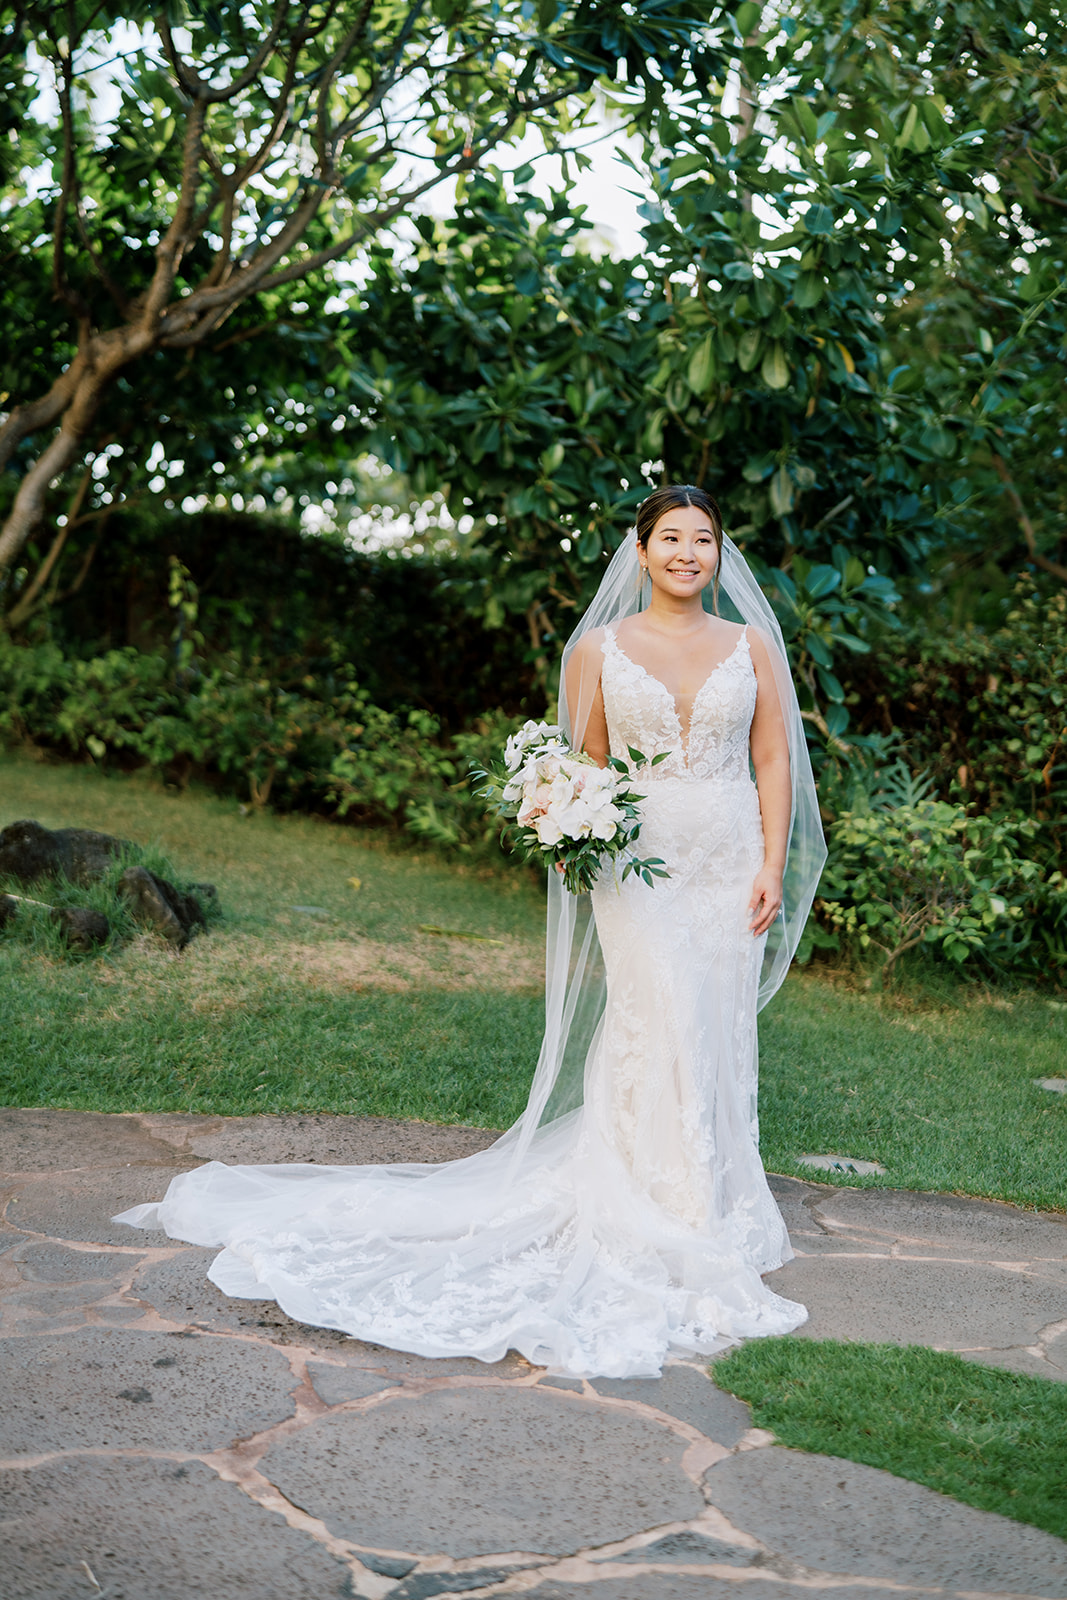 A bride in a white wedding dress standing on a stone path at The Four Seasons Resort Oahu at Ko'olina